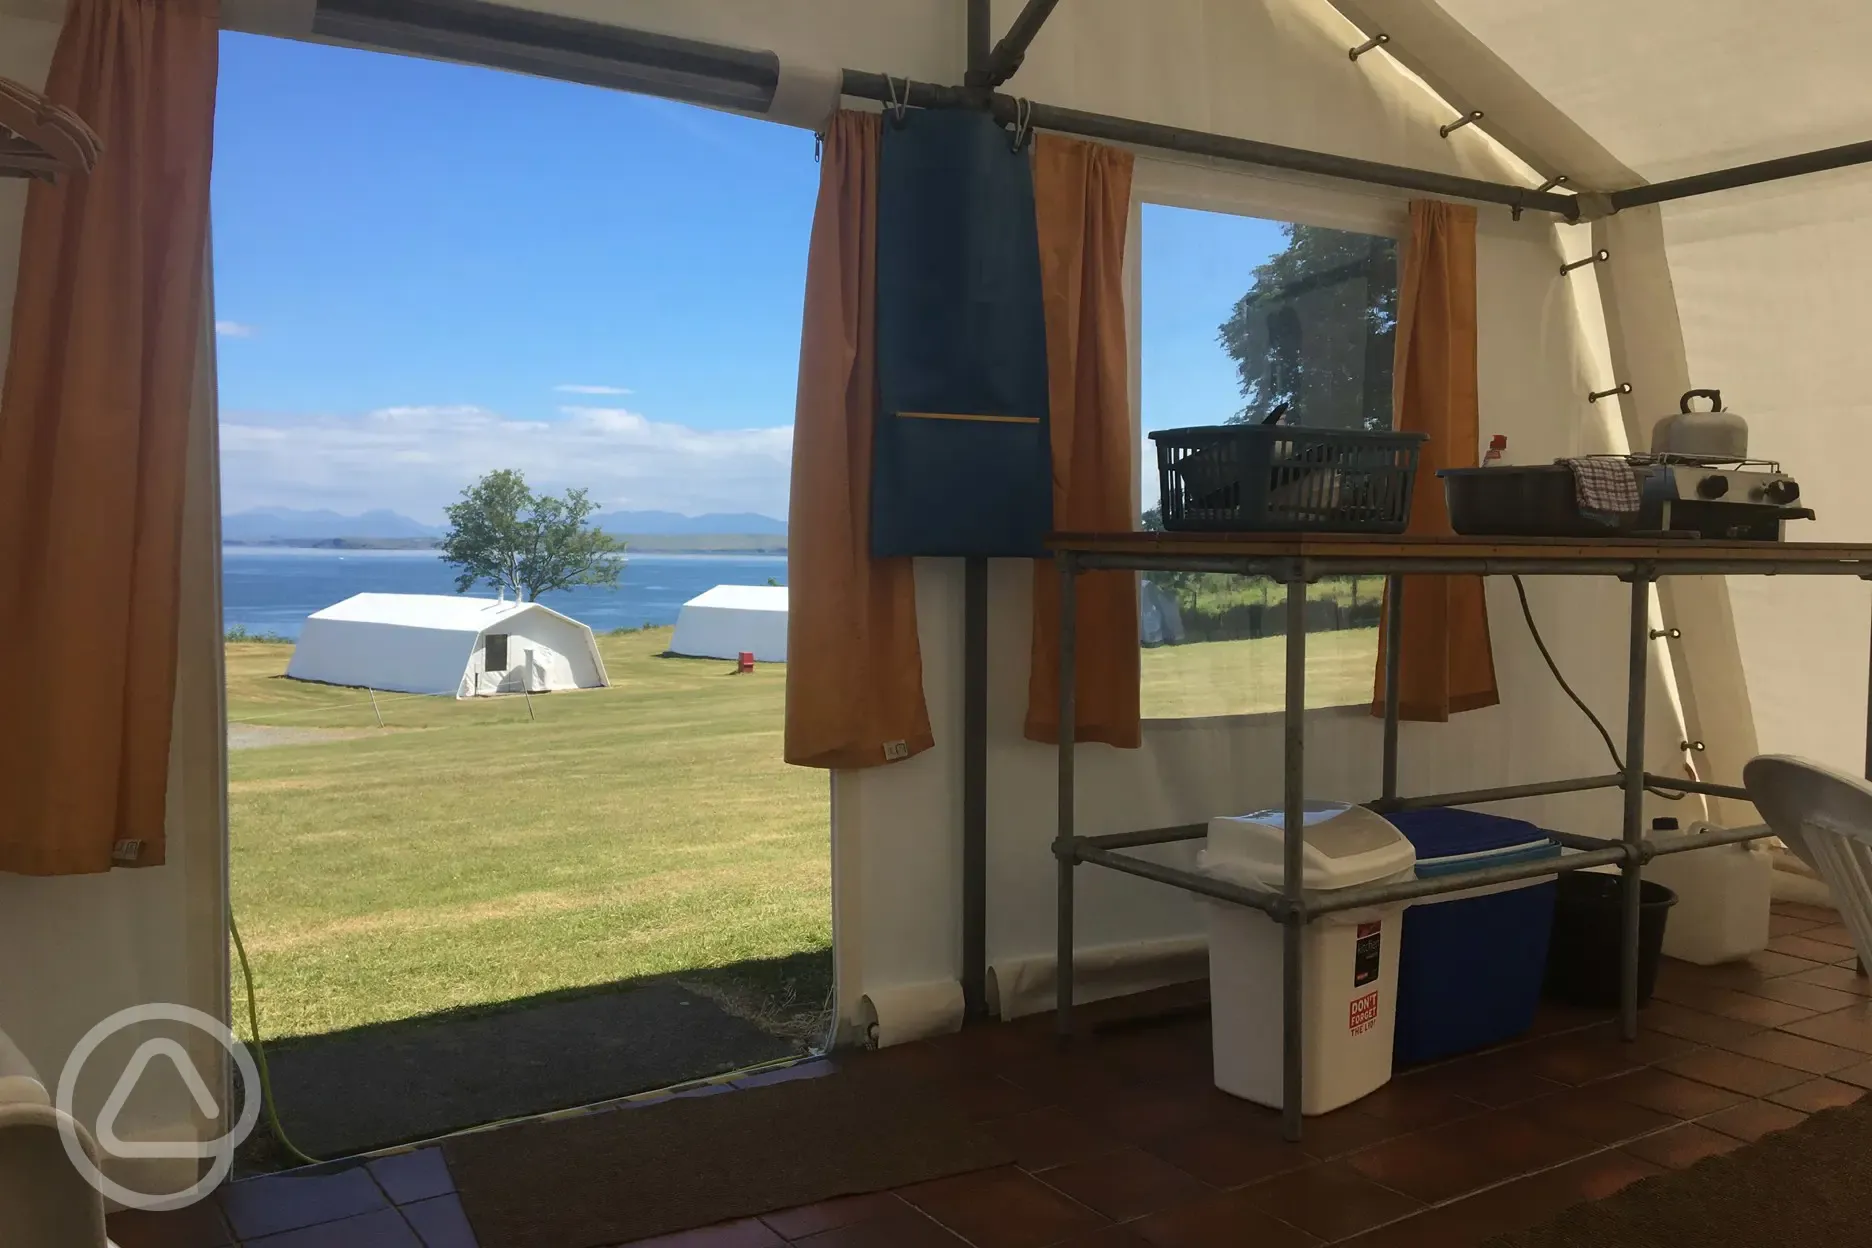 View from a Standard Shieling Tent